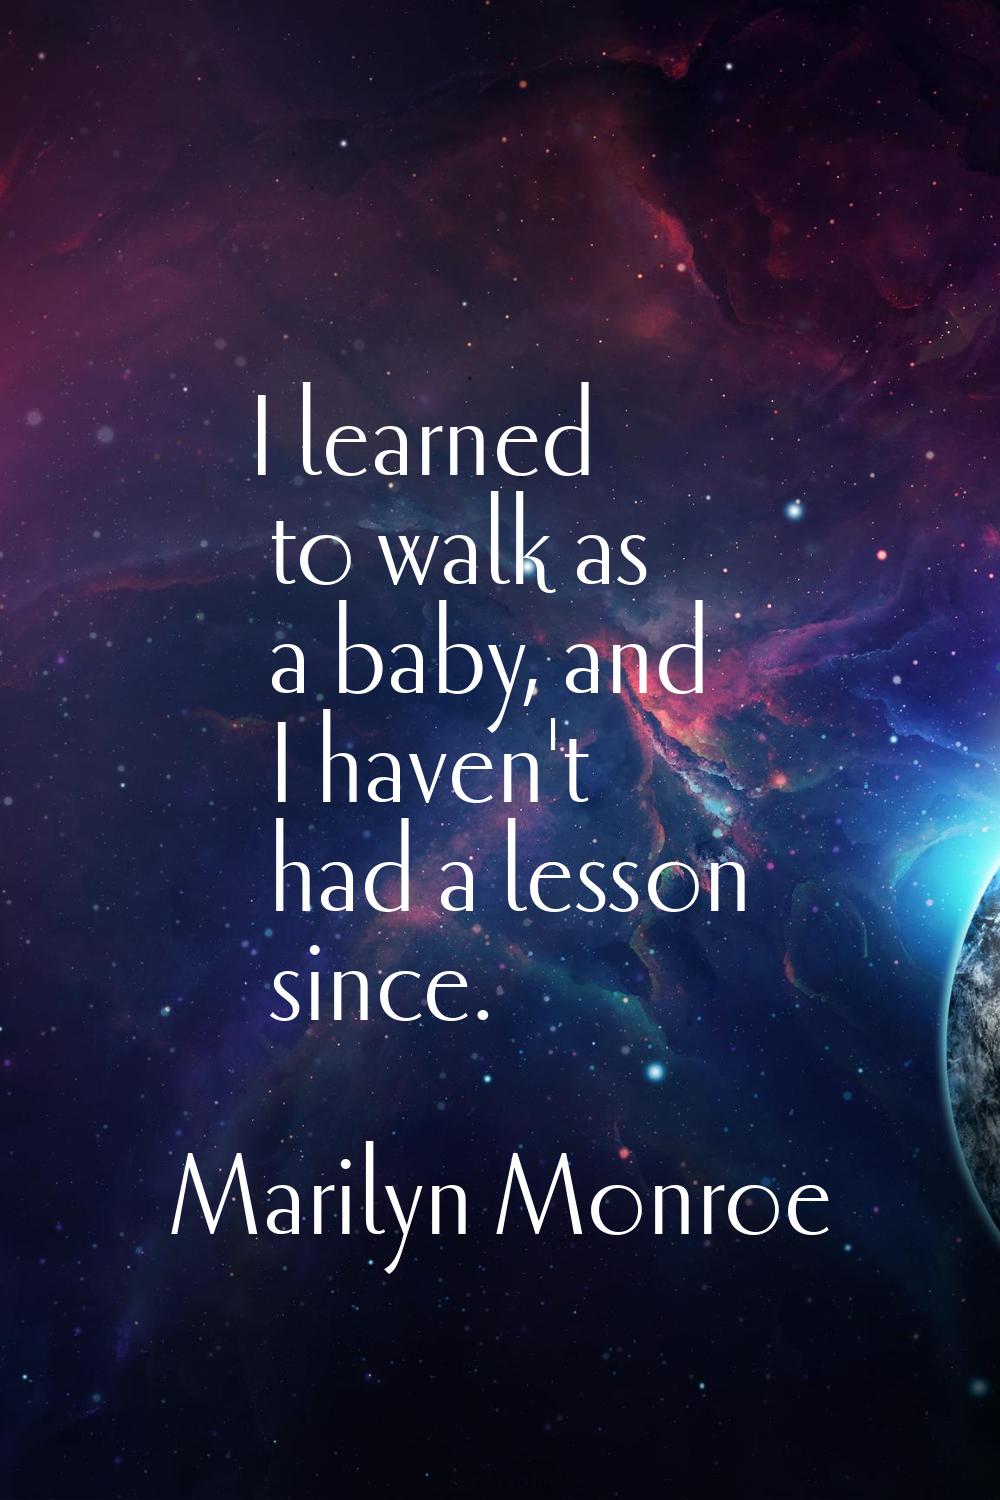 I learned to walk as a baby, and I haven't had a lesson since.